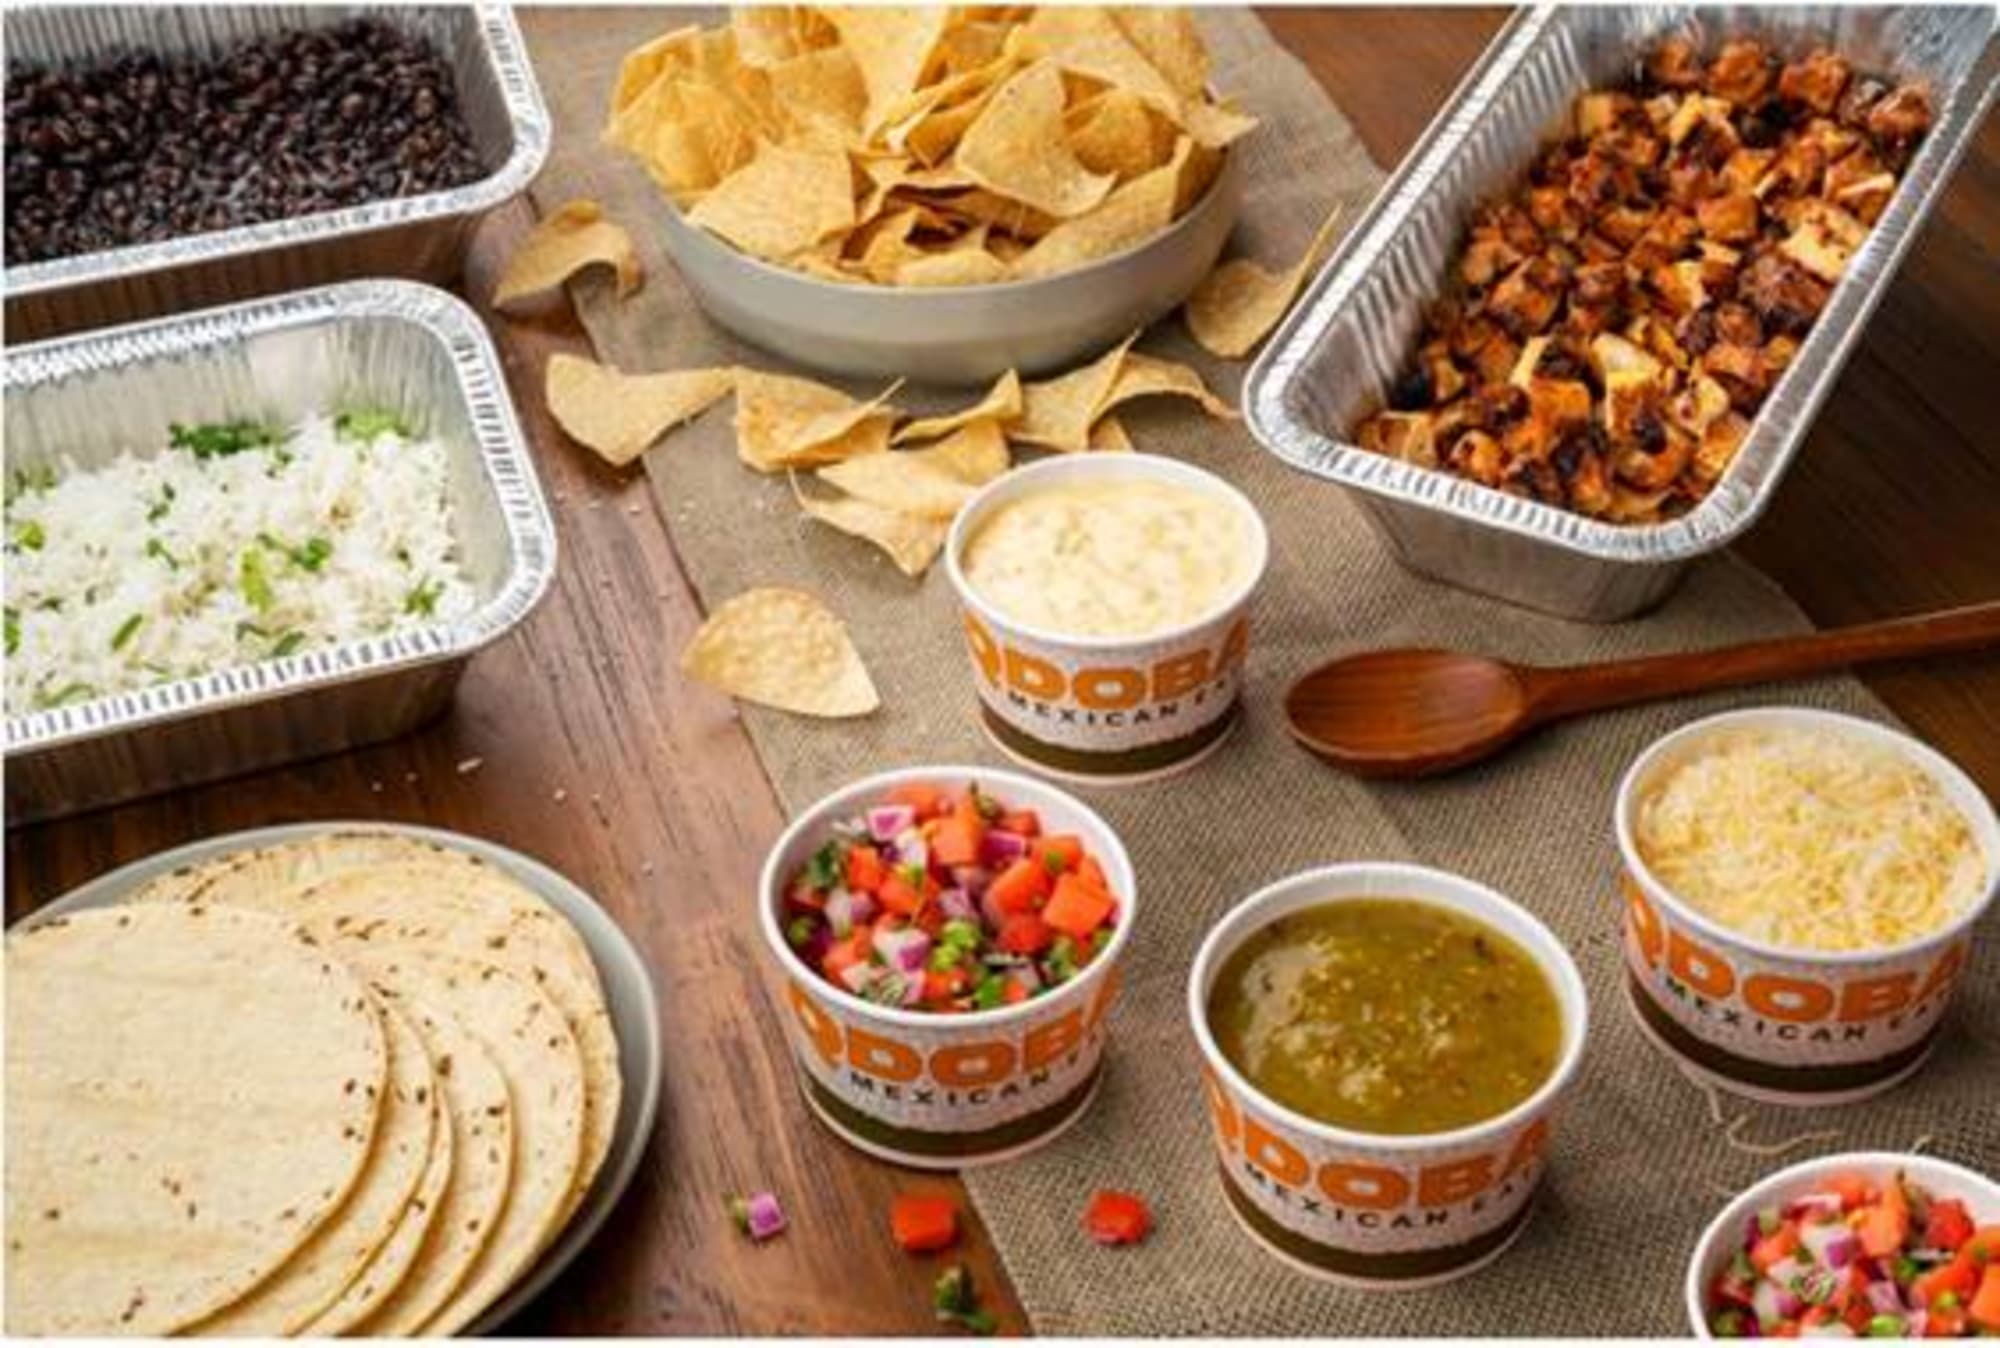 QDOBA is teaming with Cholula to bring us some sweet heat